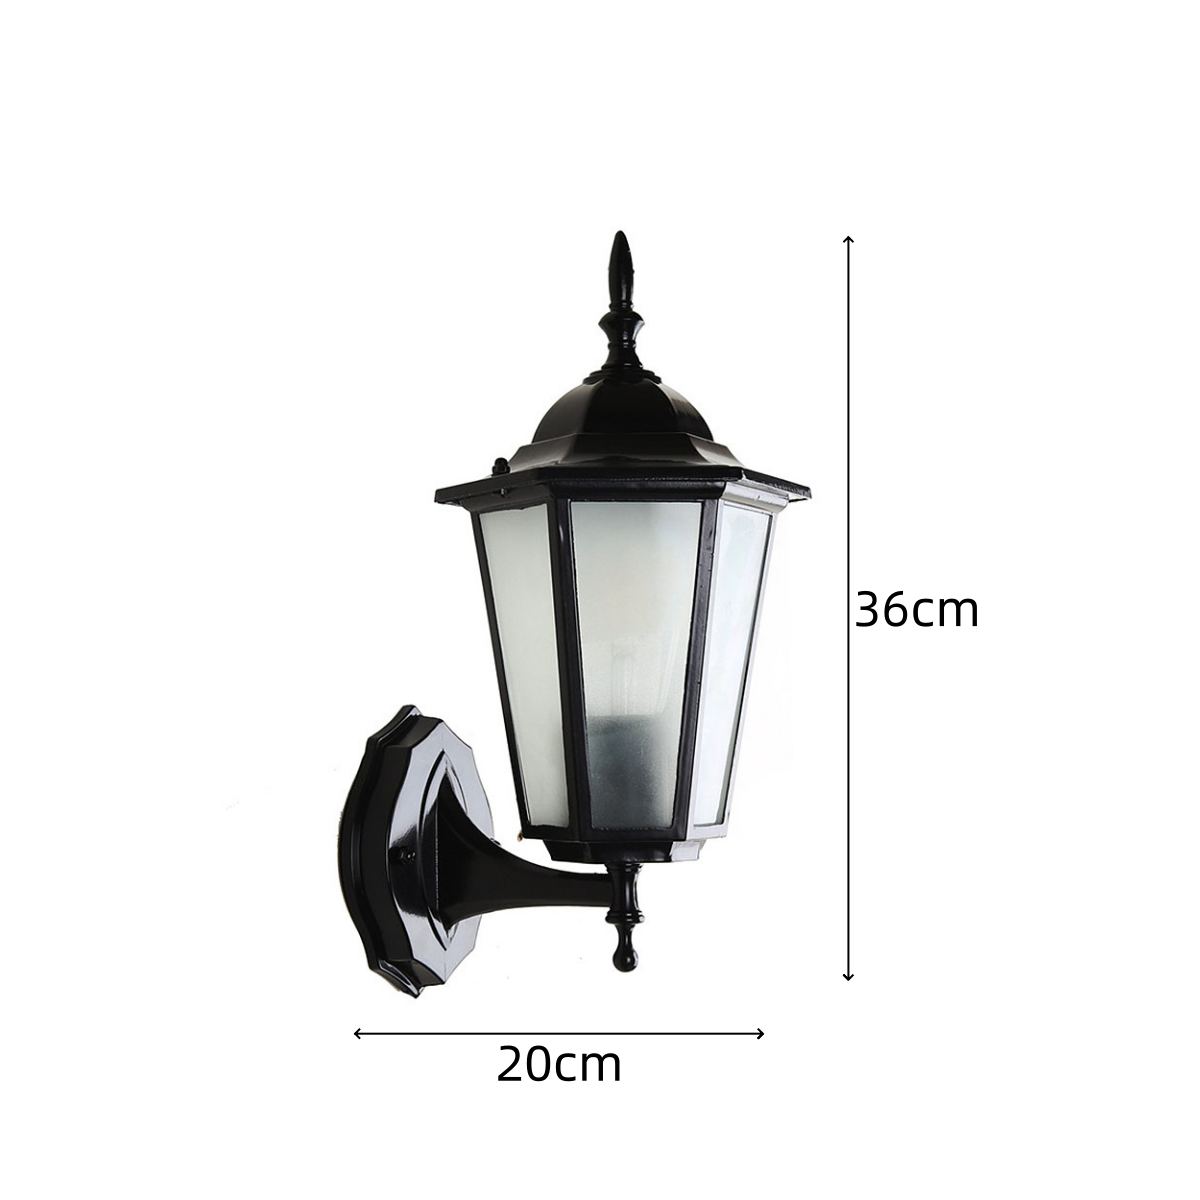 Classic Clear Glass Outdoor Wall Light